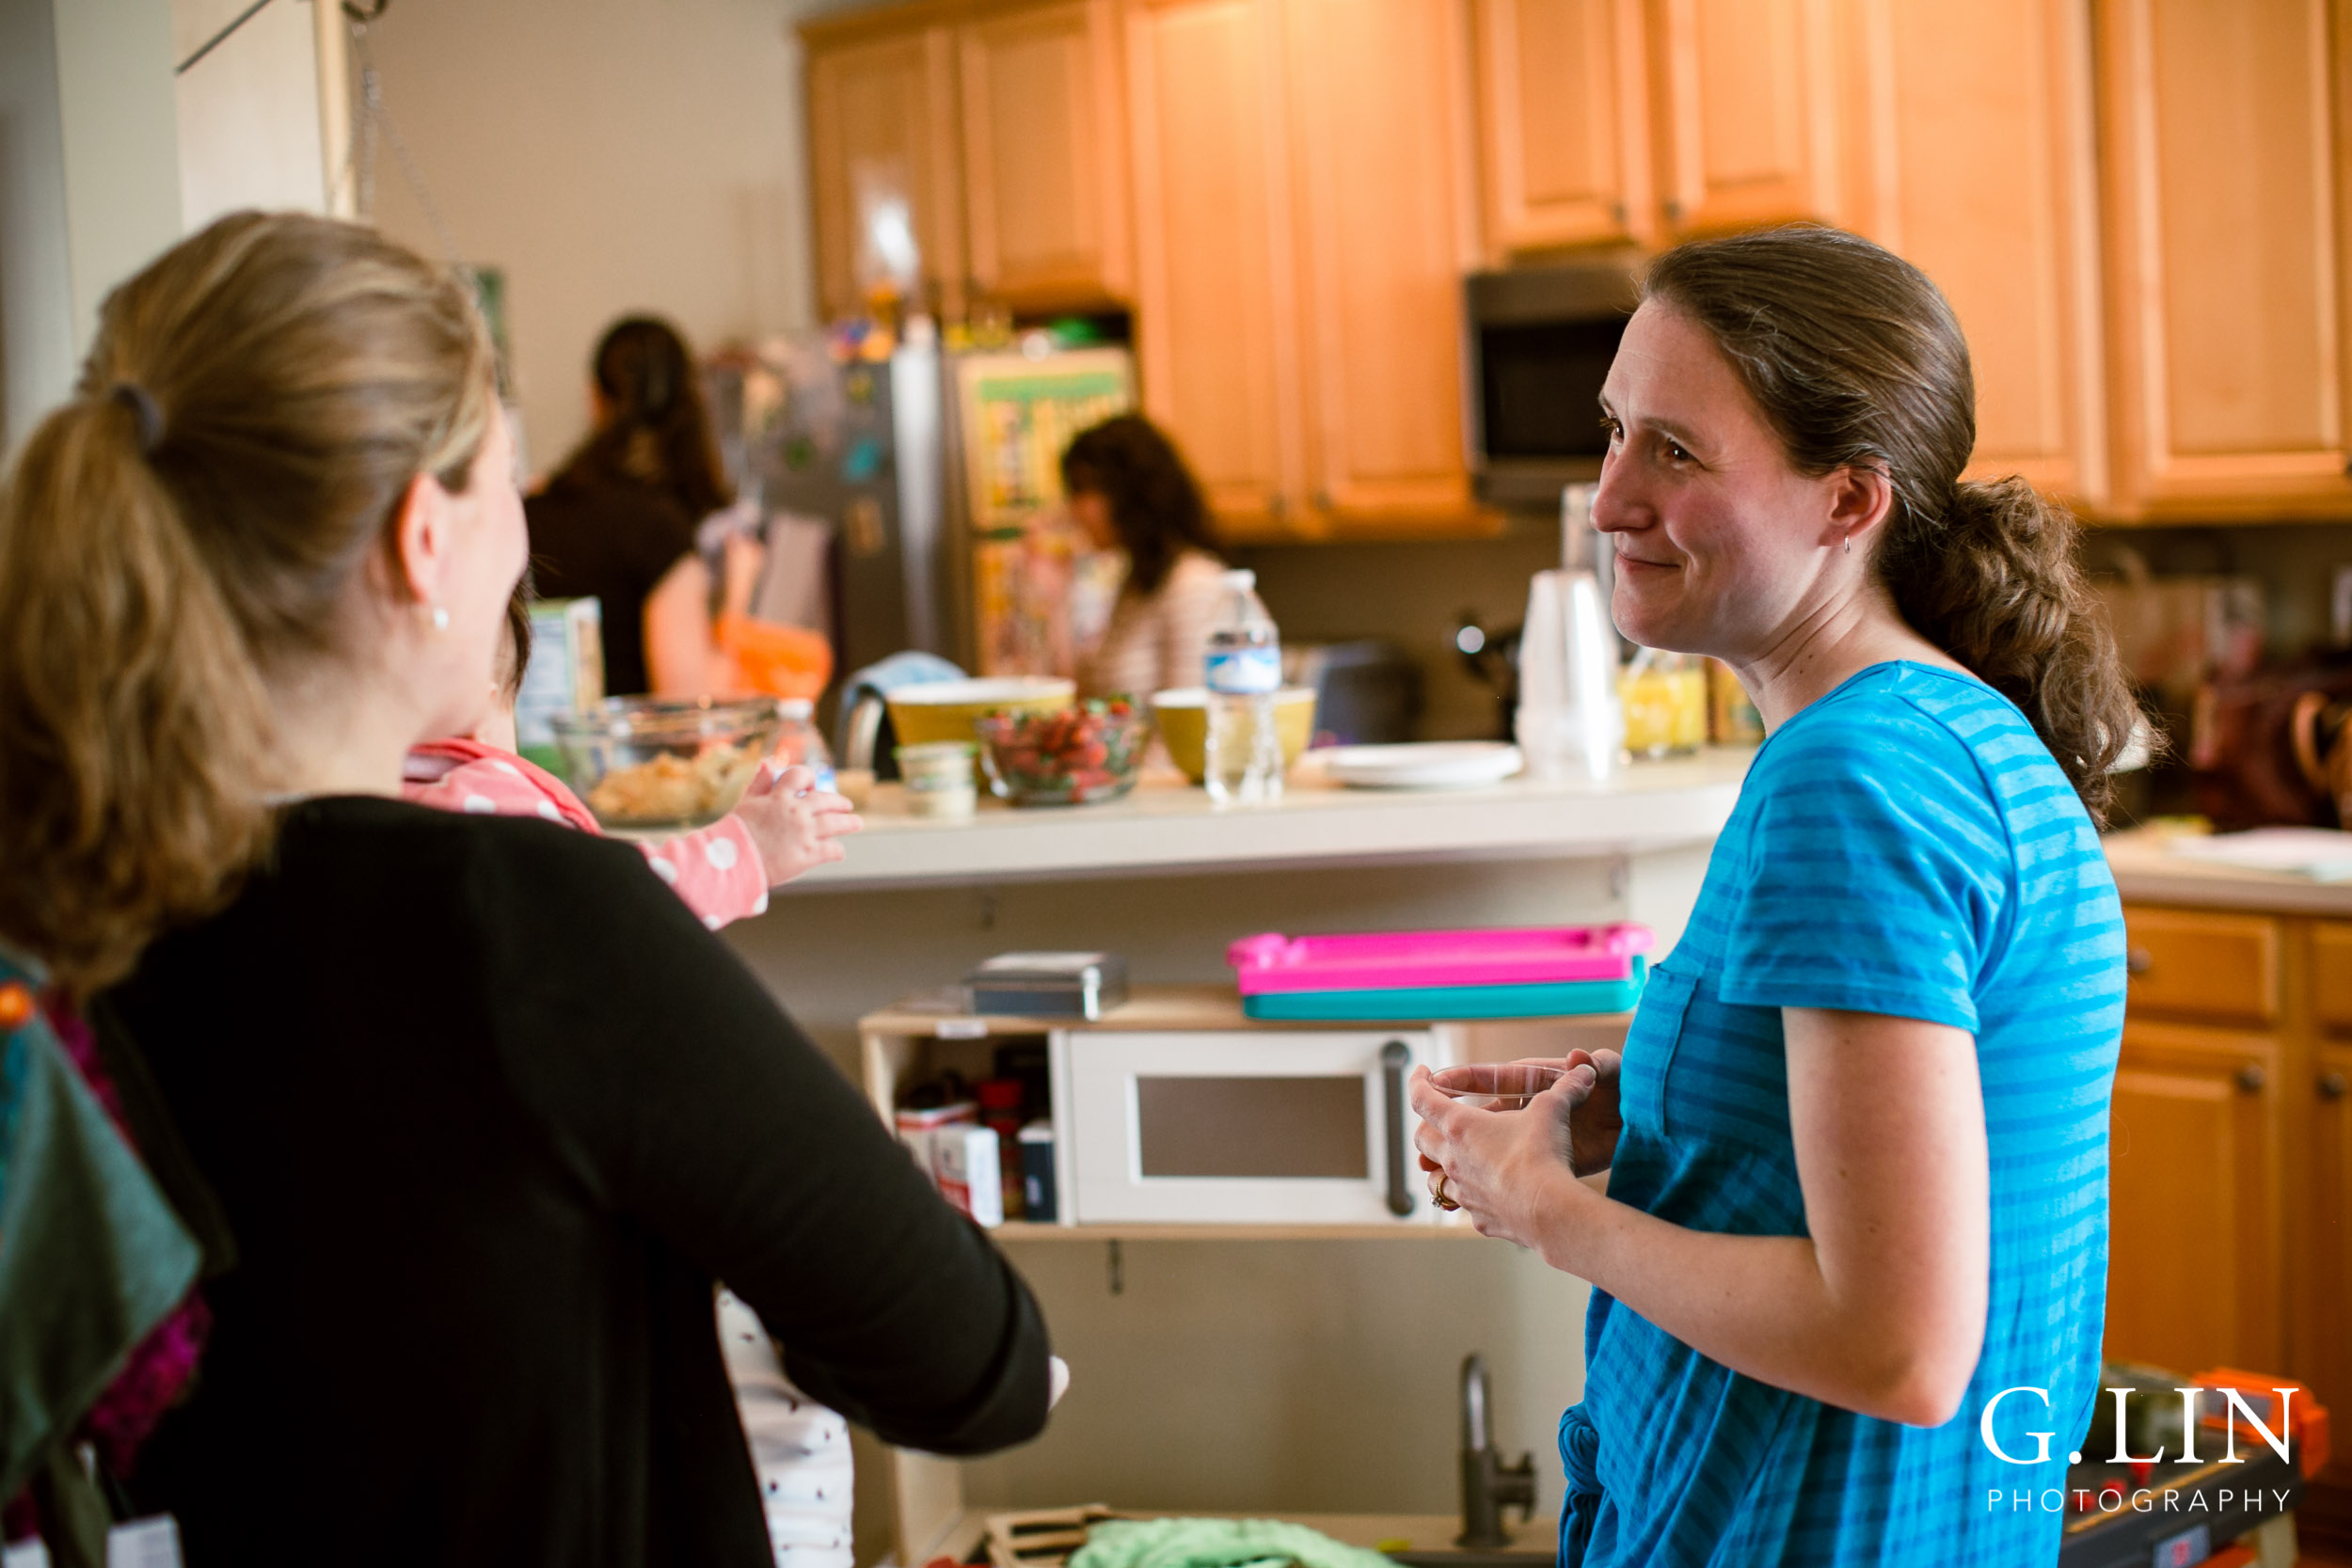 Raleigh Event Photographer | G. Lin Photography | Woman talking to another woman inside kitchen